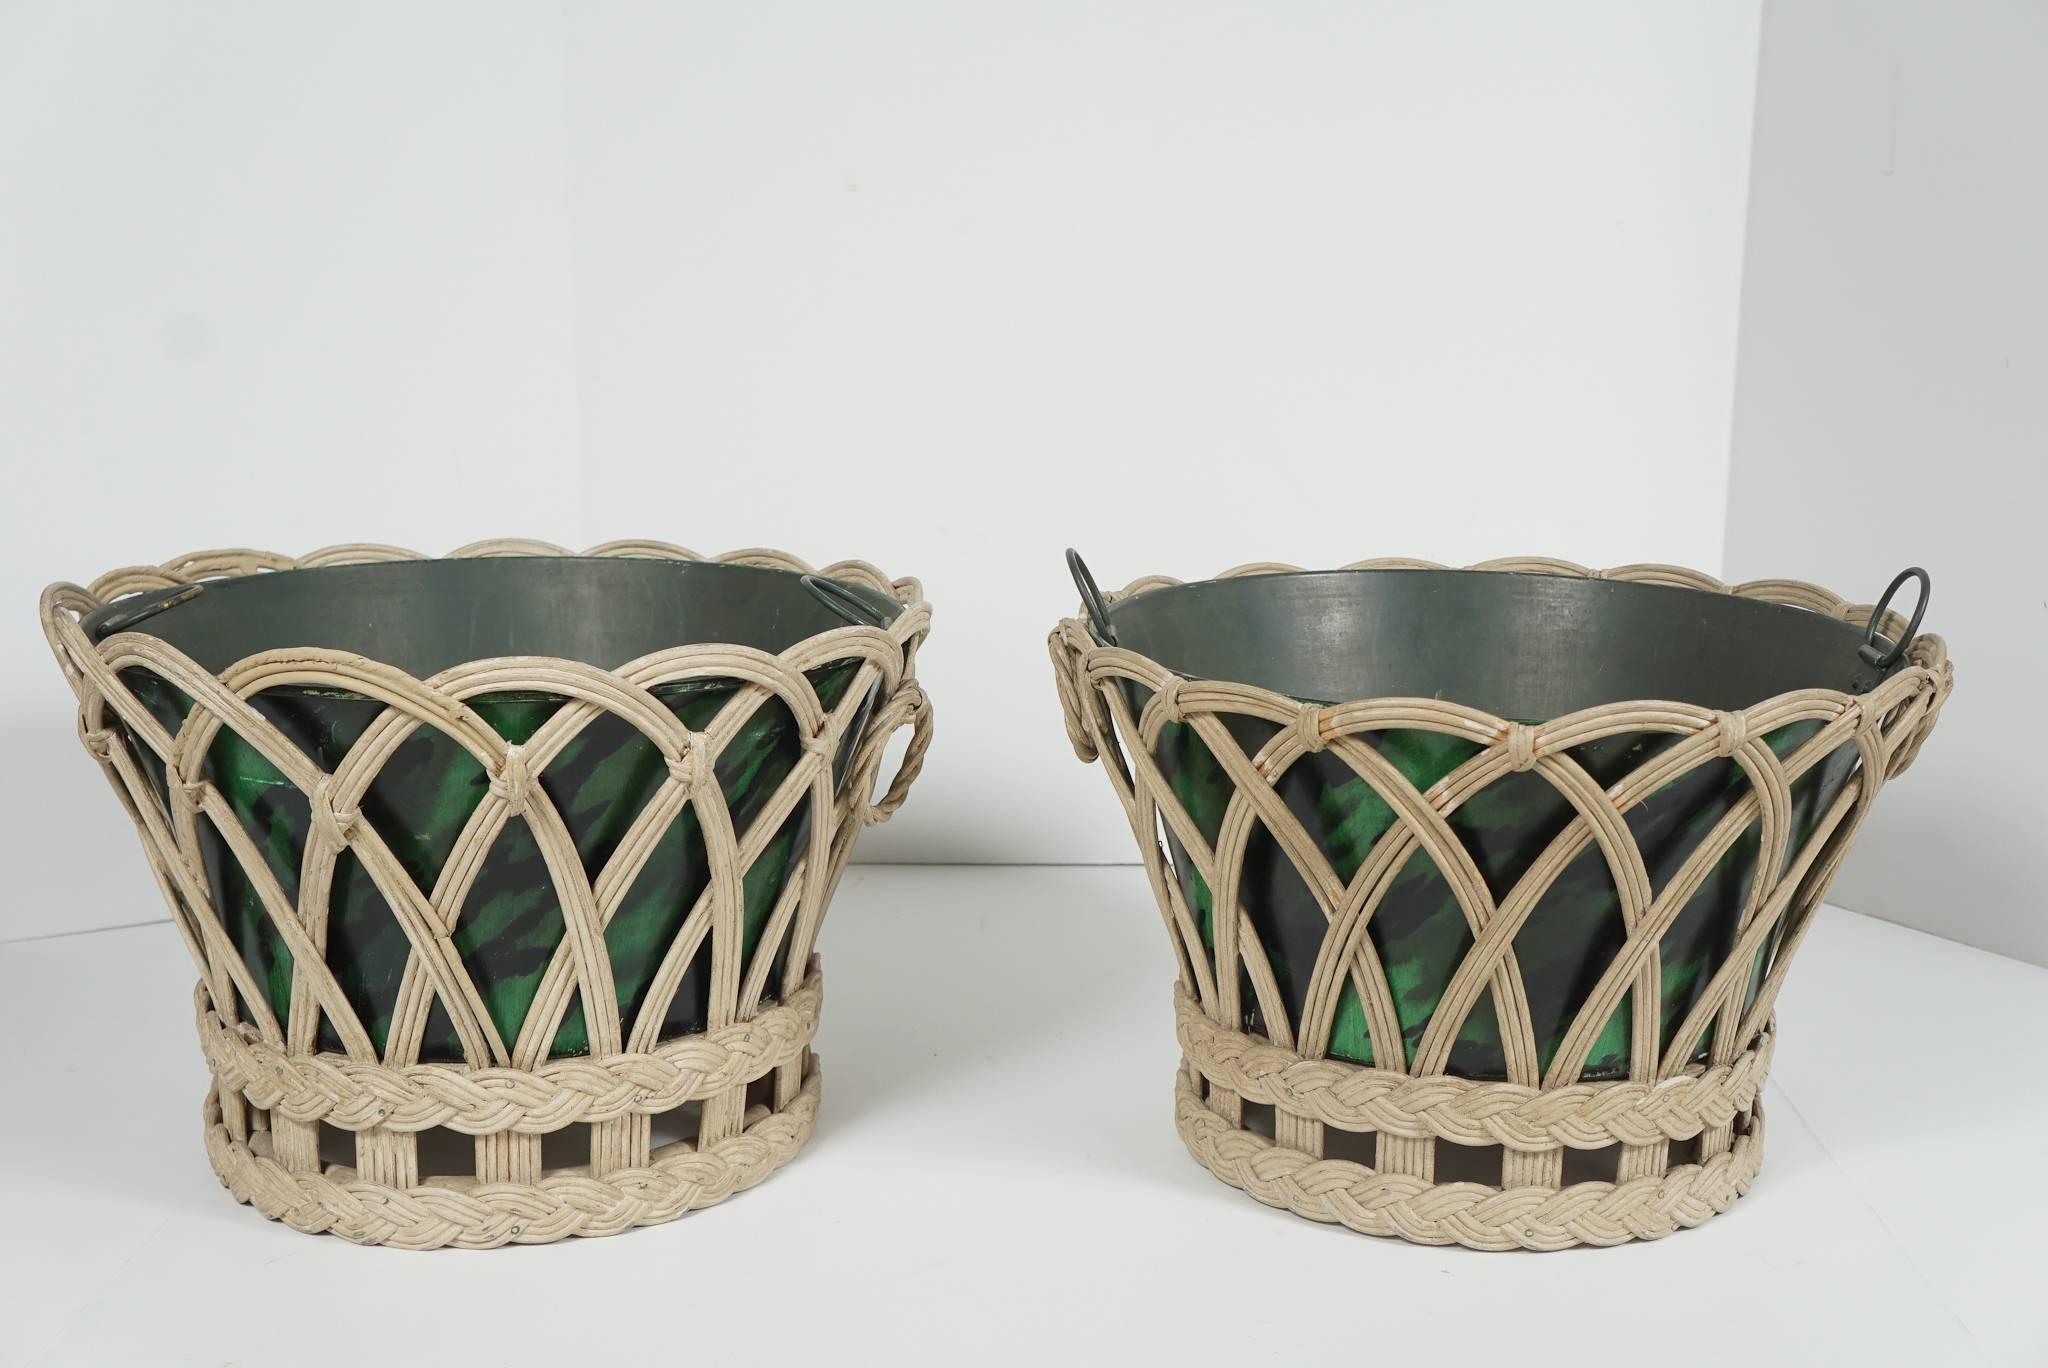 This lovely pair of vintage tole and wicker planters were once part of the Virginia estate known as Oak Springs Farms which belonged to Paul & Bunny Mellon. Mrs Mellon was well known for her interest and support of floral and Horticultural endevers